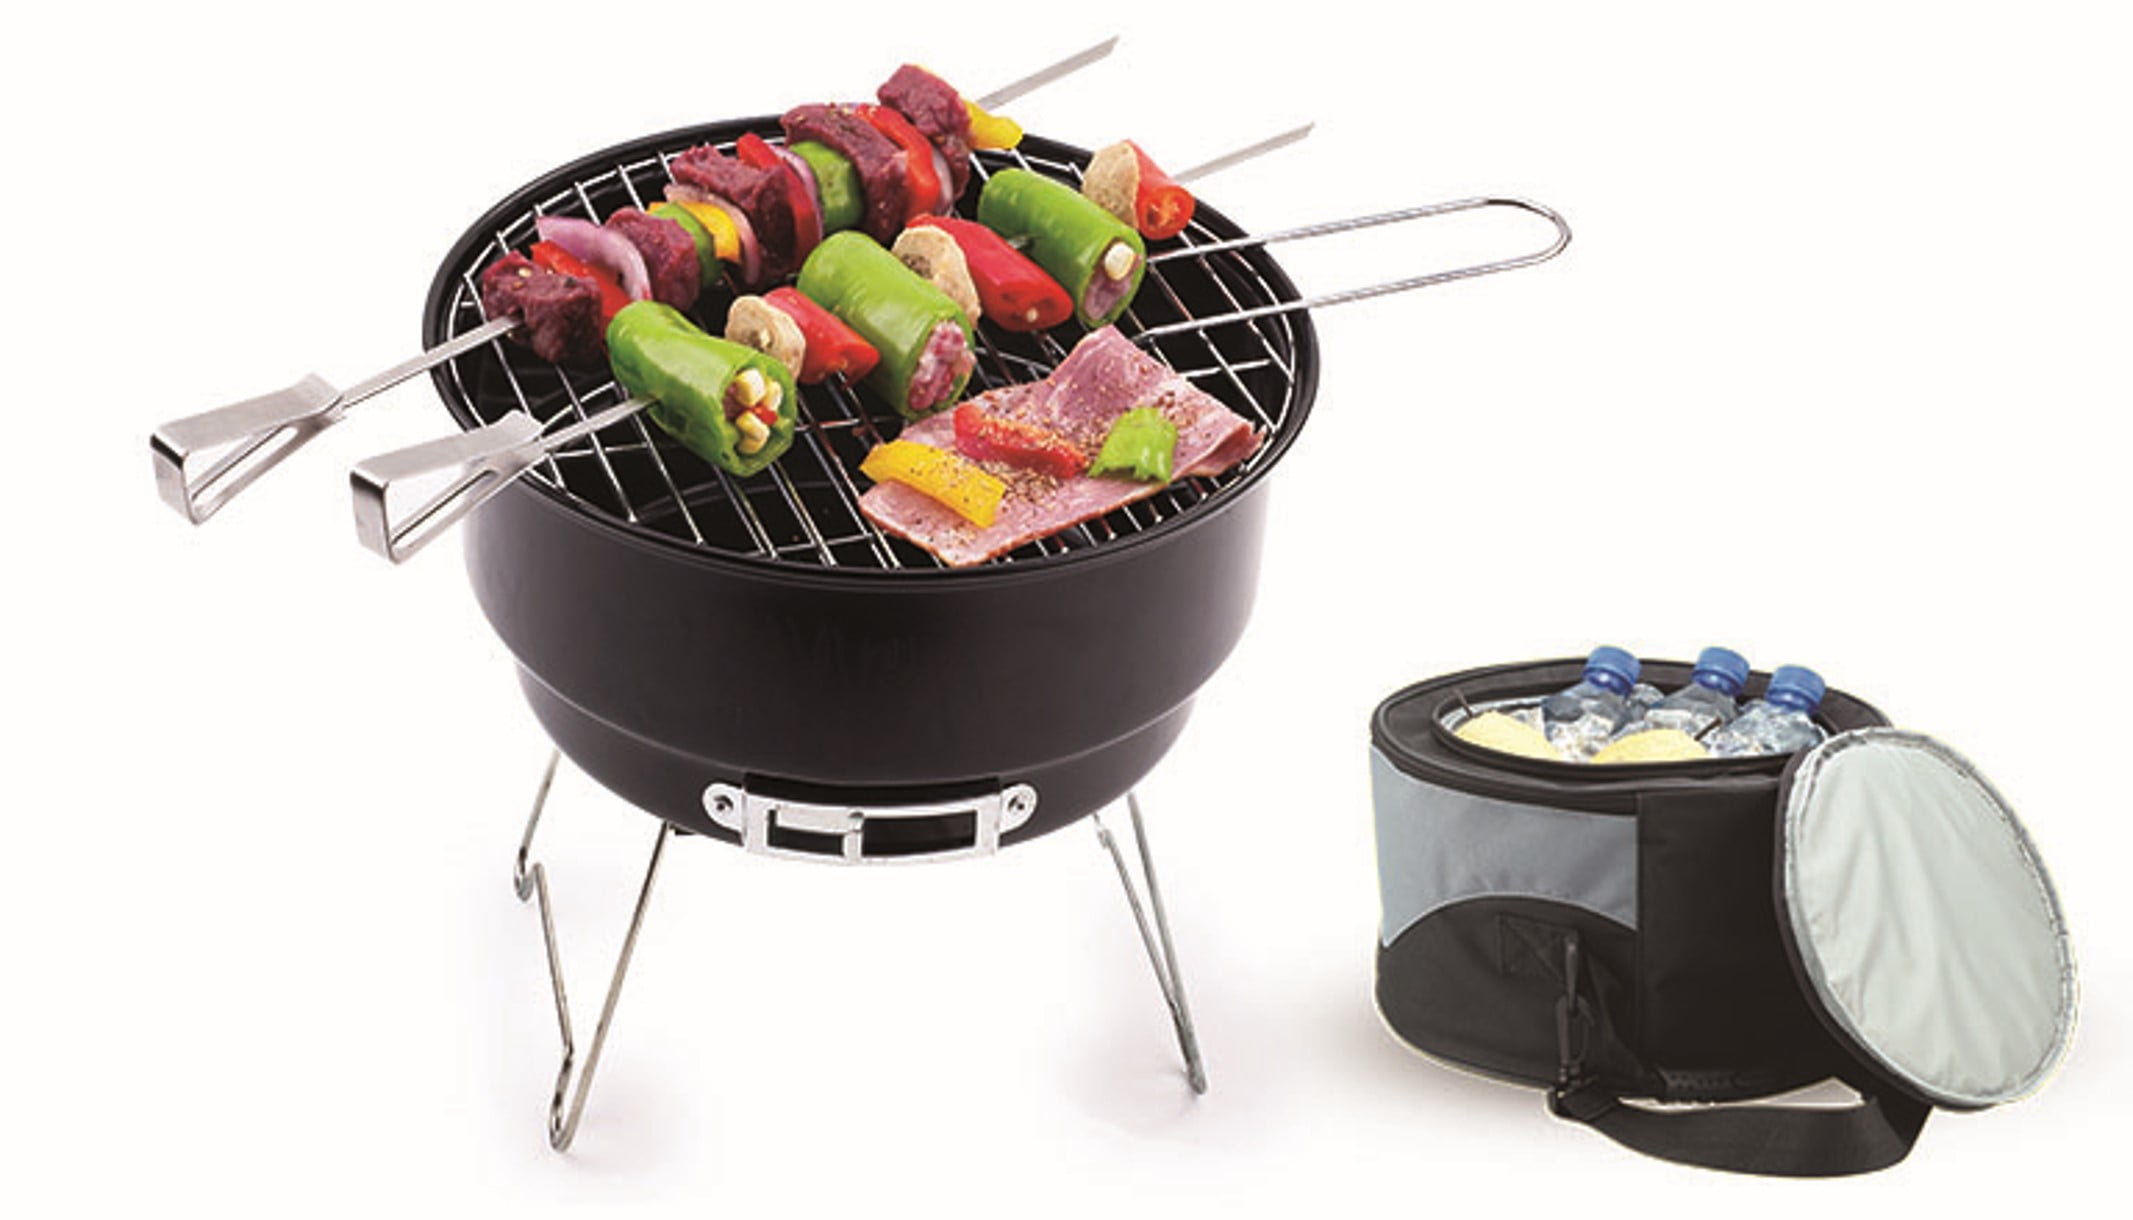 10" Ozark Trail Portable Camping Charcoal Grill w/ Cooler Bag $9.97 + Free S&H w/ Walmart+ or $35+